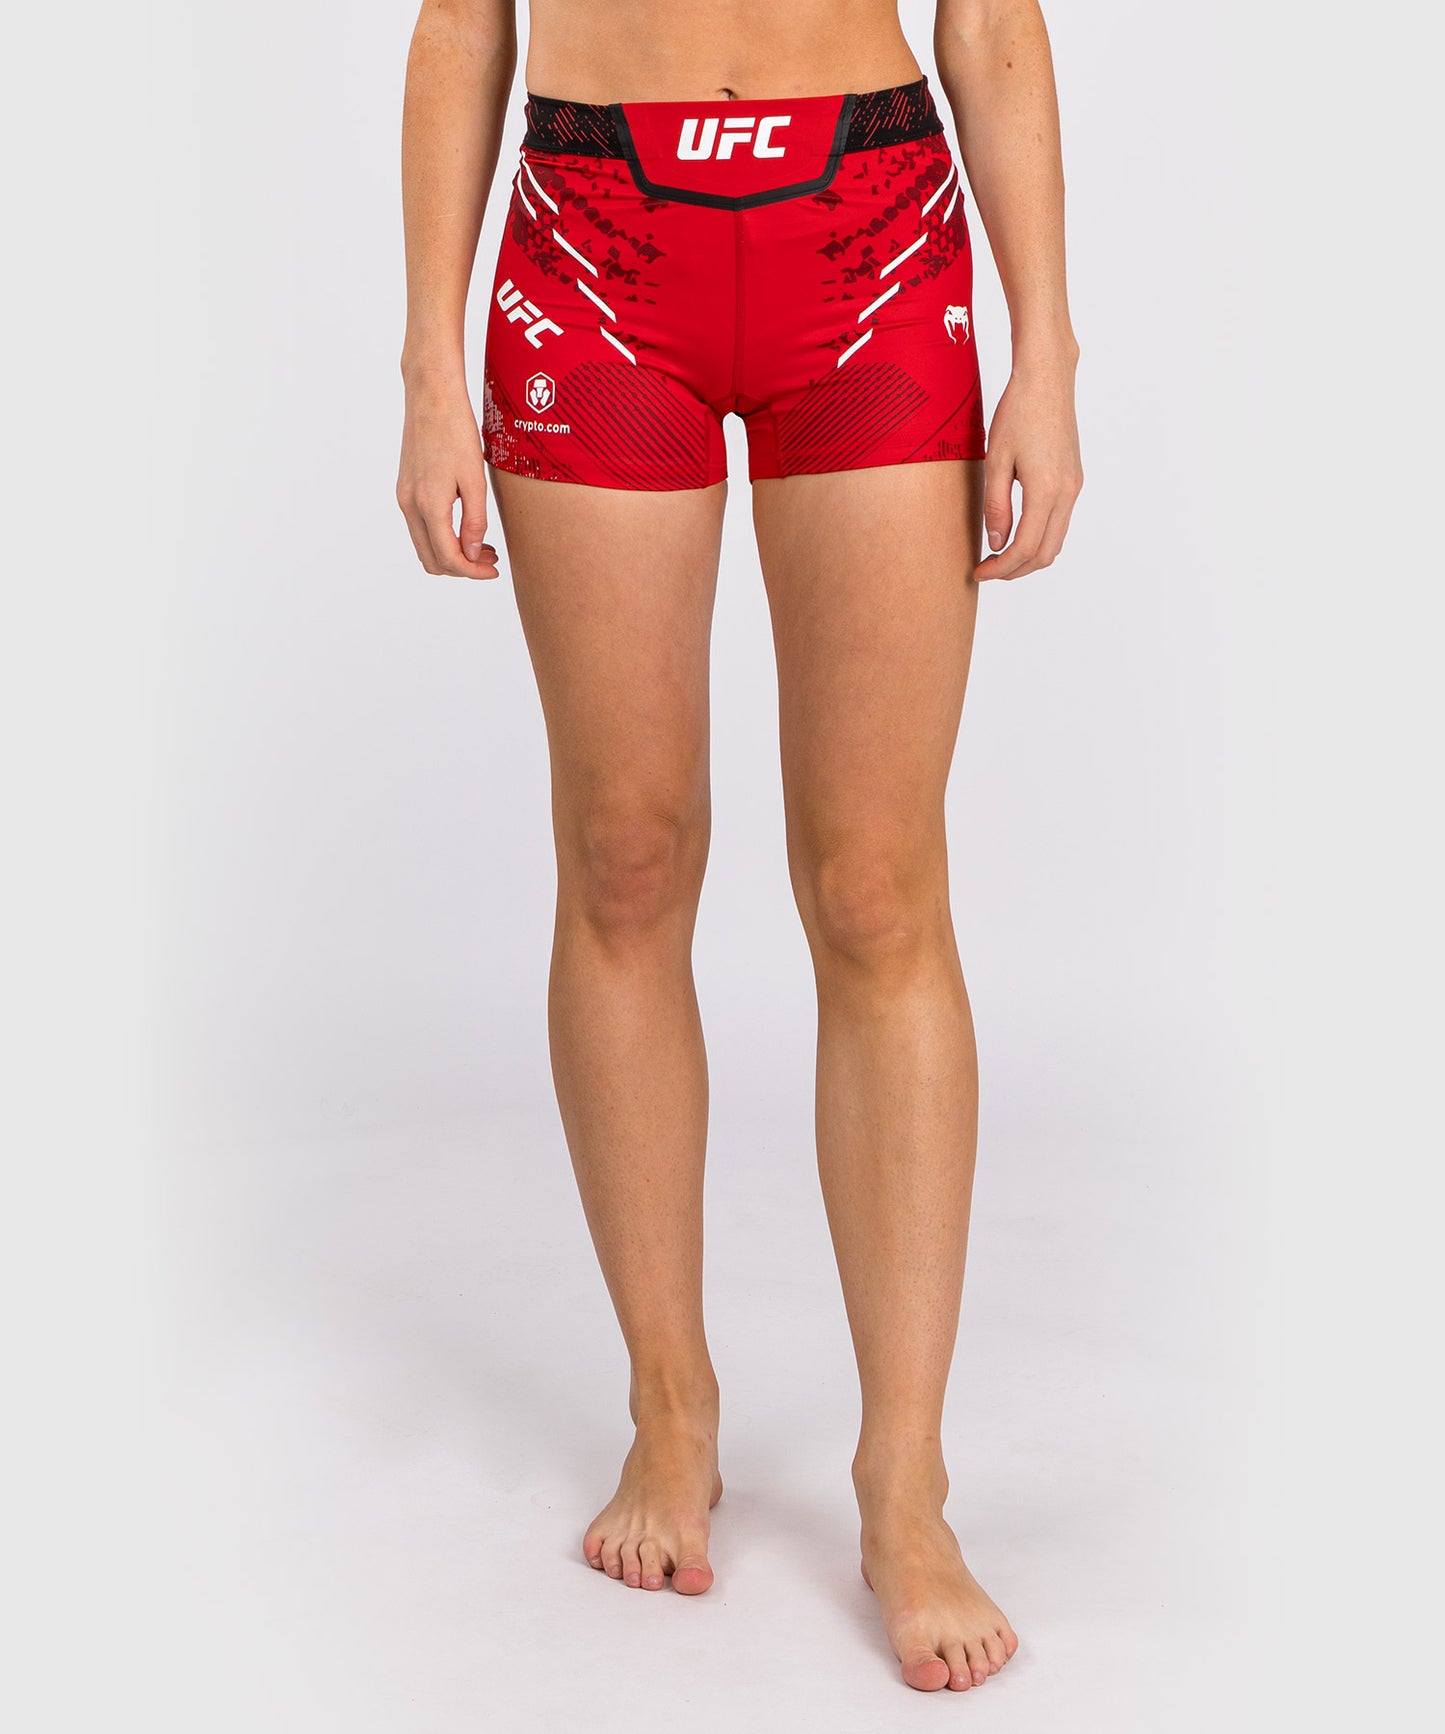 UFC Adrenaline by Venum Authentic Fight Night Short Vale Tudo Mujer - Short Fit - Rojo